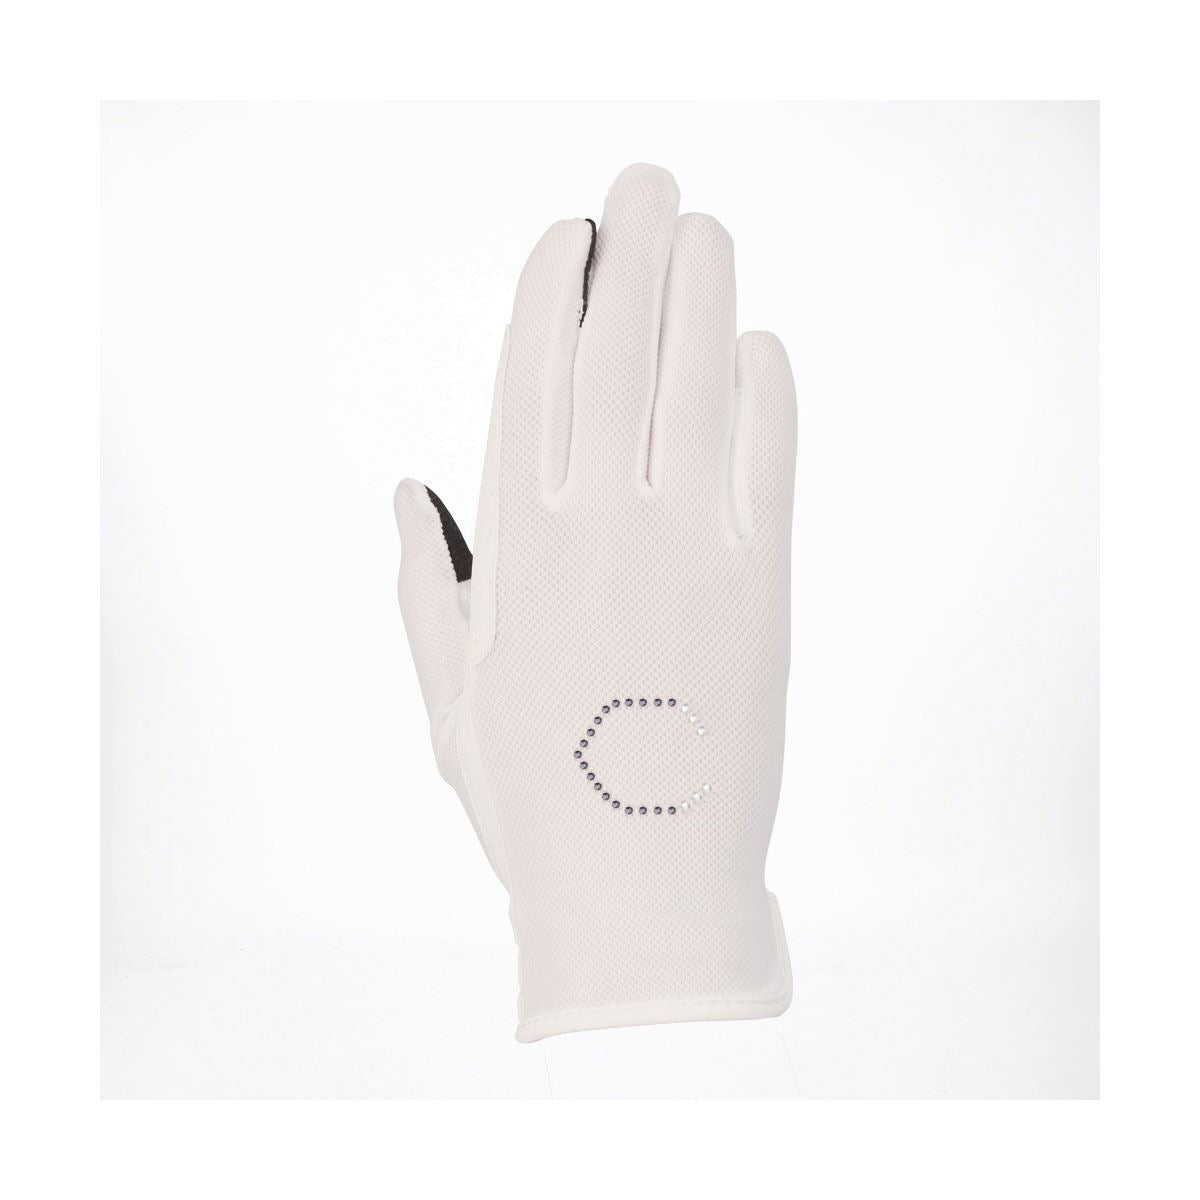 Coldstream Lintlaw CoolMesh Summer Riding Gloves - Just Horse Riders